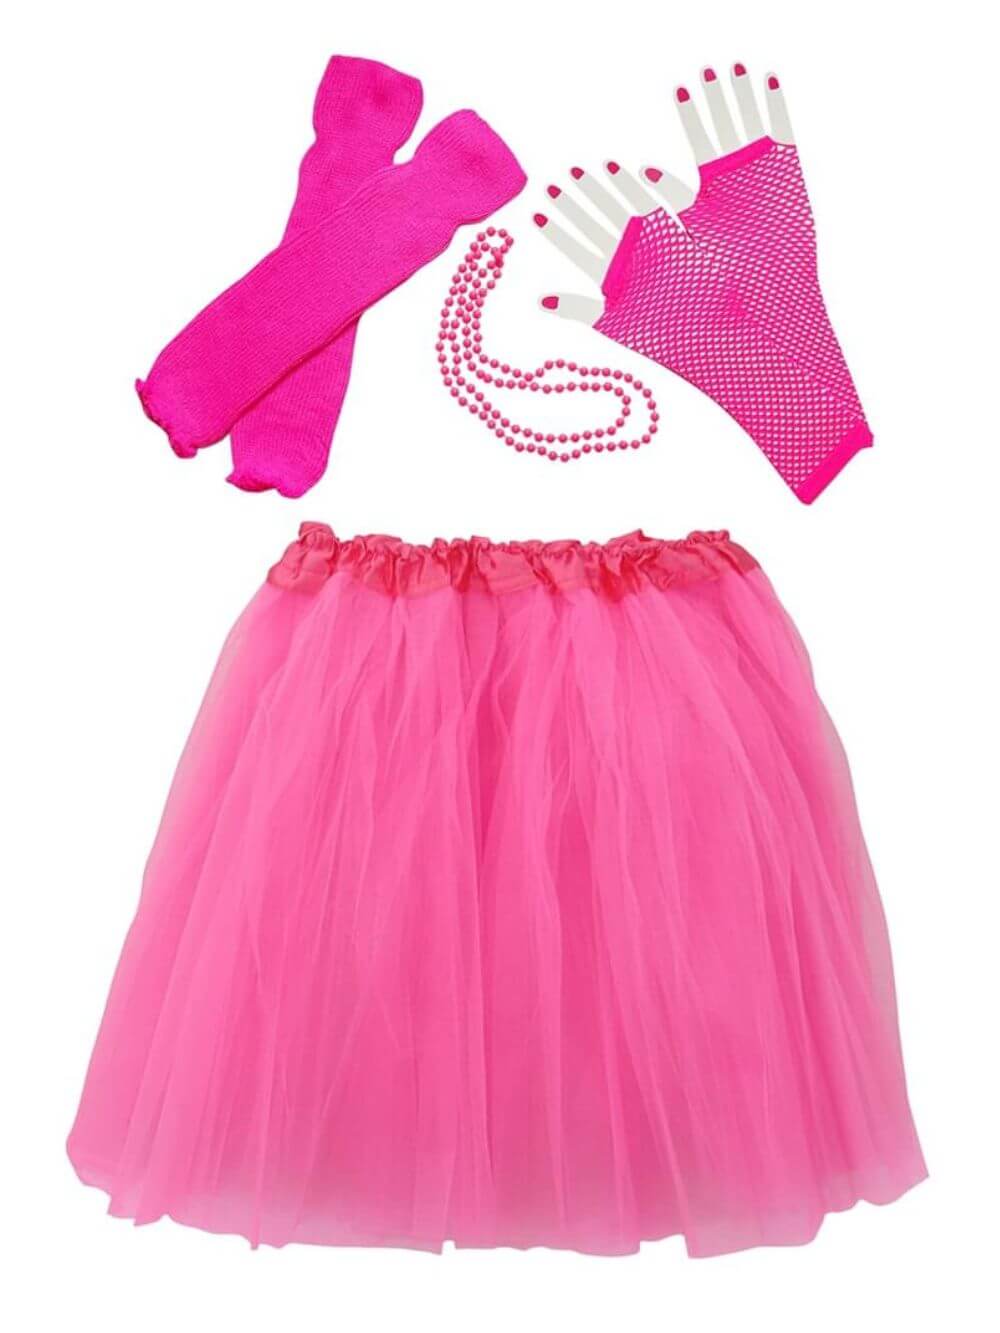 Adult, Plus Hot Pink 80's Tutu Skirt Costume, Fast Shipping